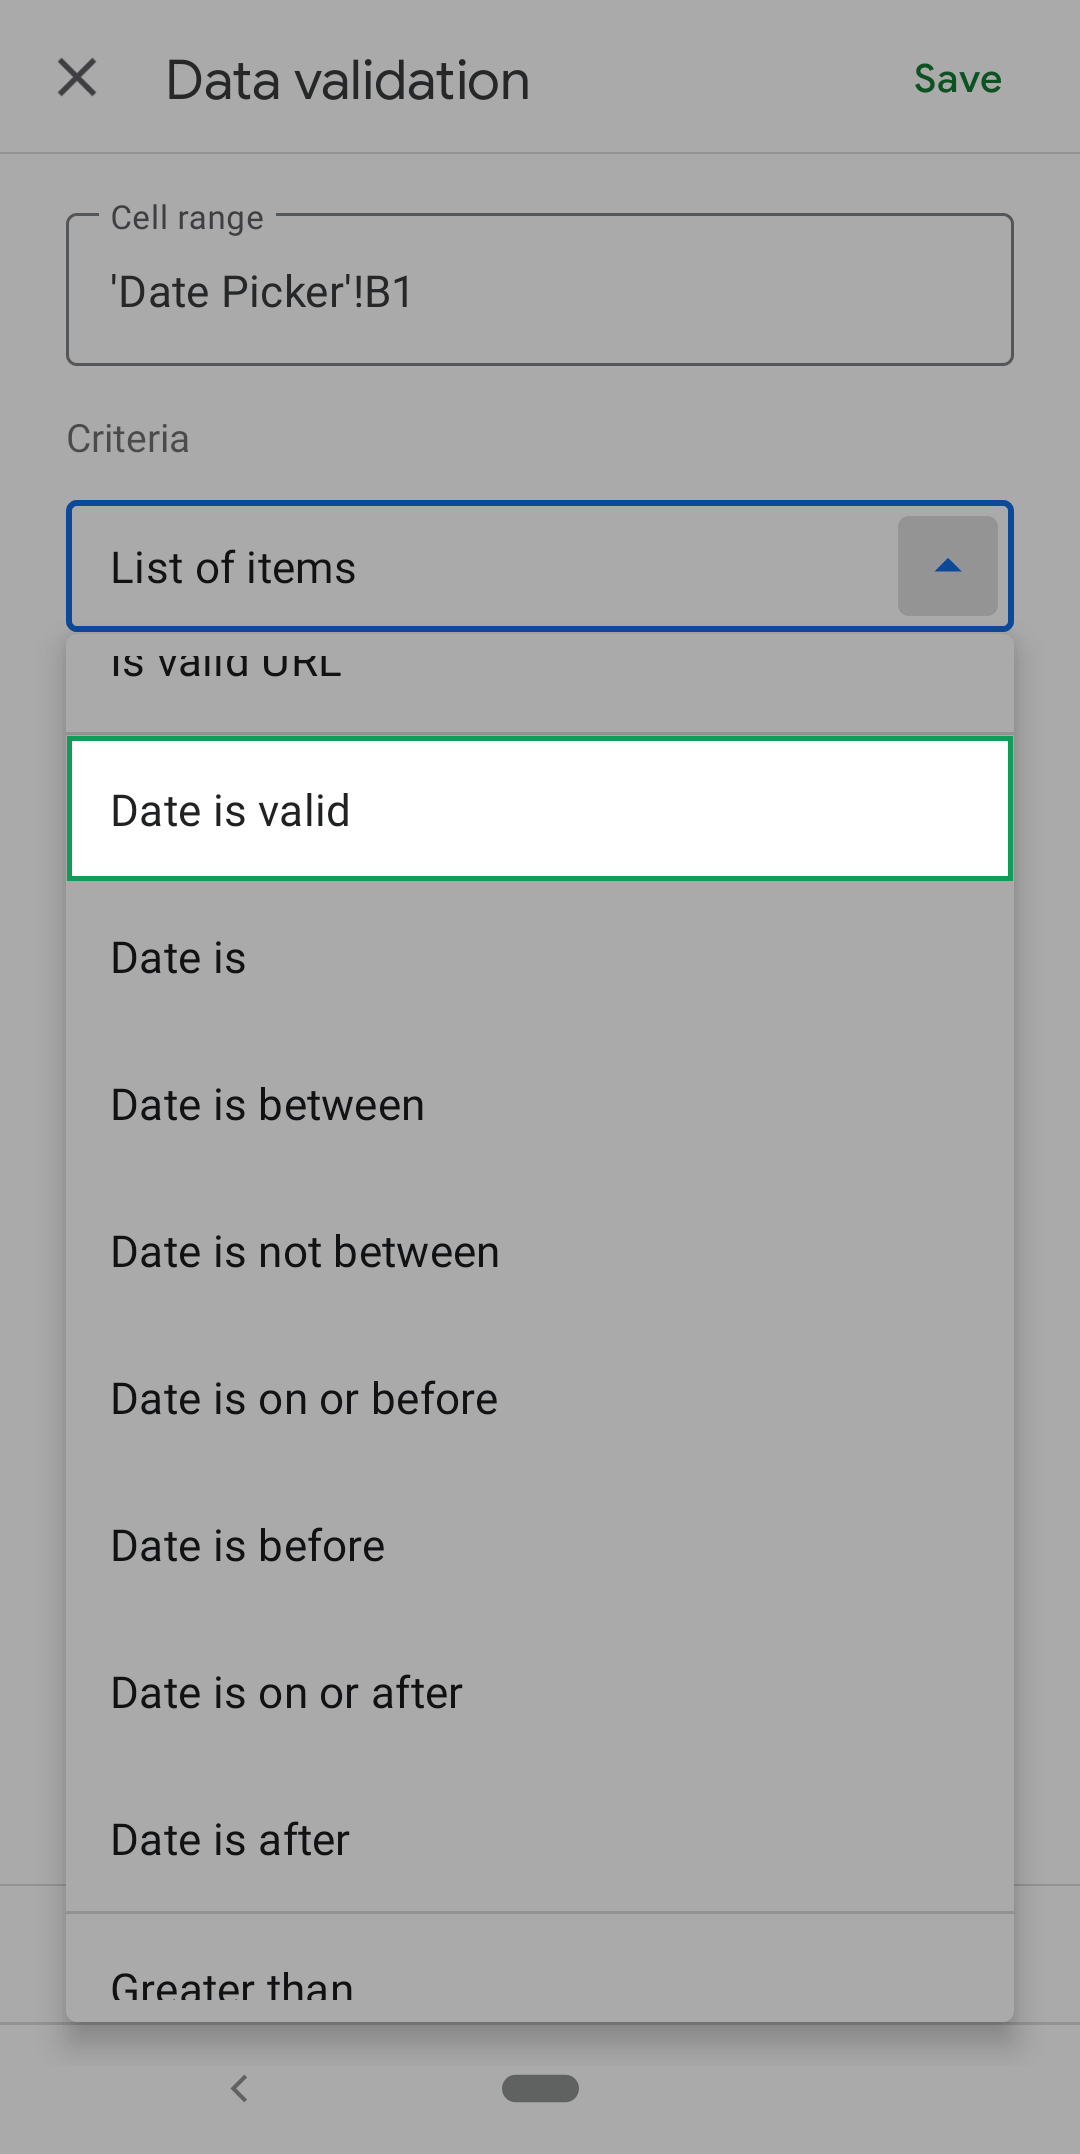 shows the desired criteria option, date is valid, in the criteria dropdown of the data validation menu in the android app